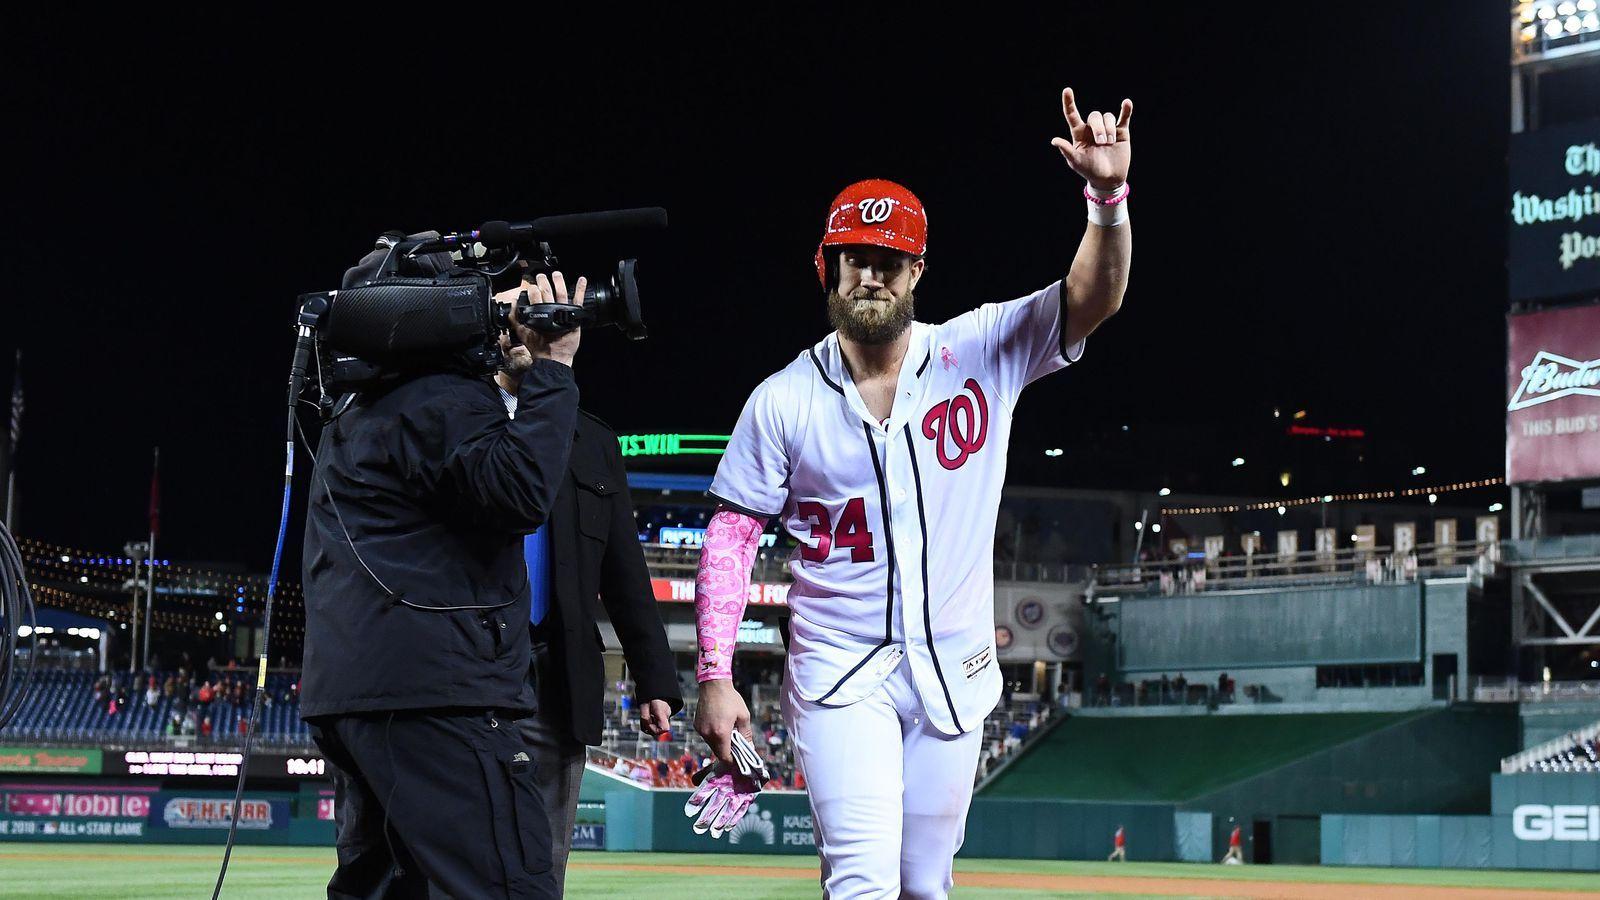 May 13 was a great day to be Bryce Harper